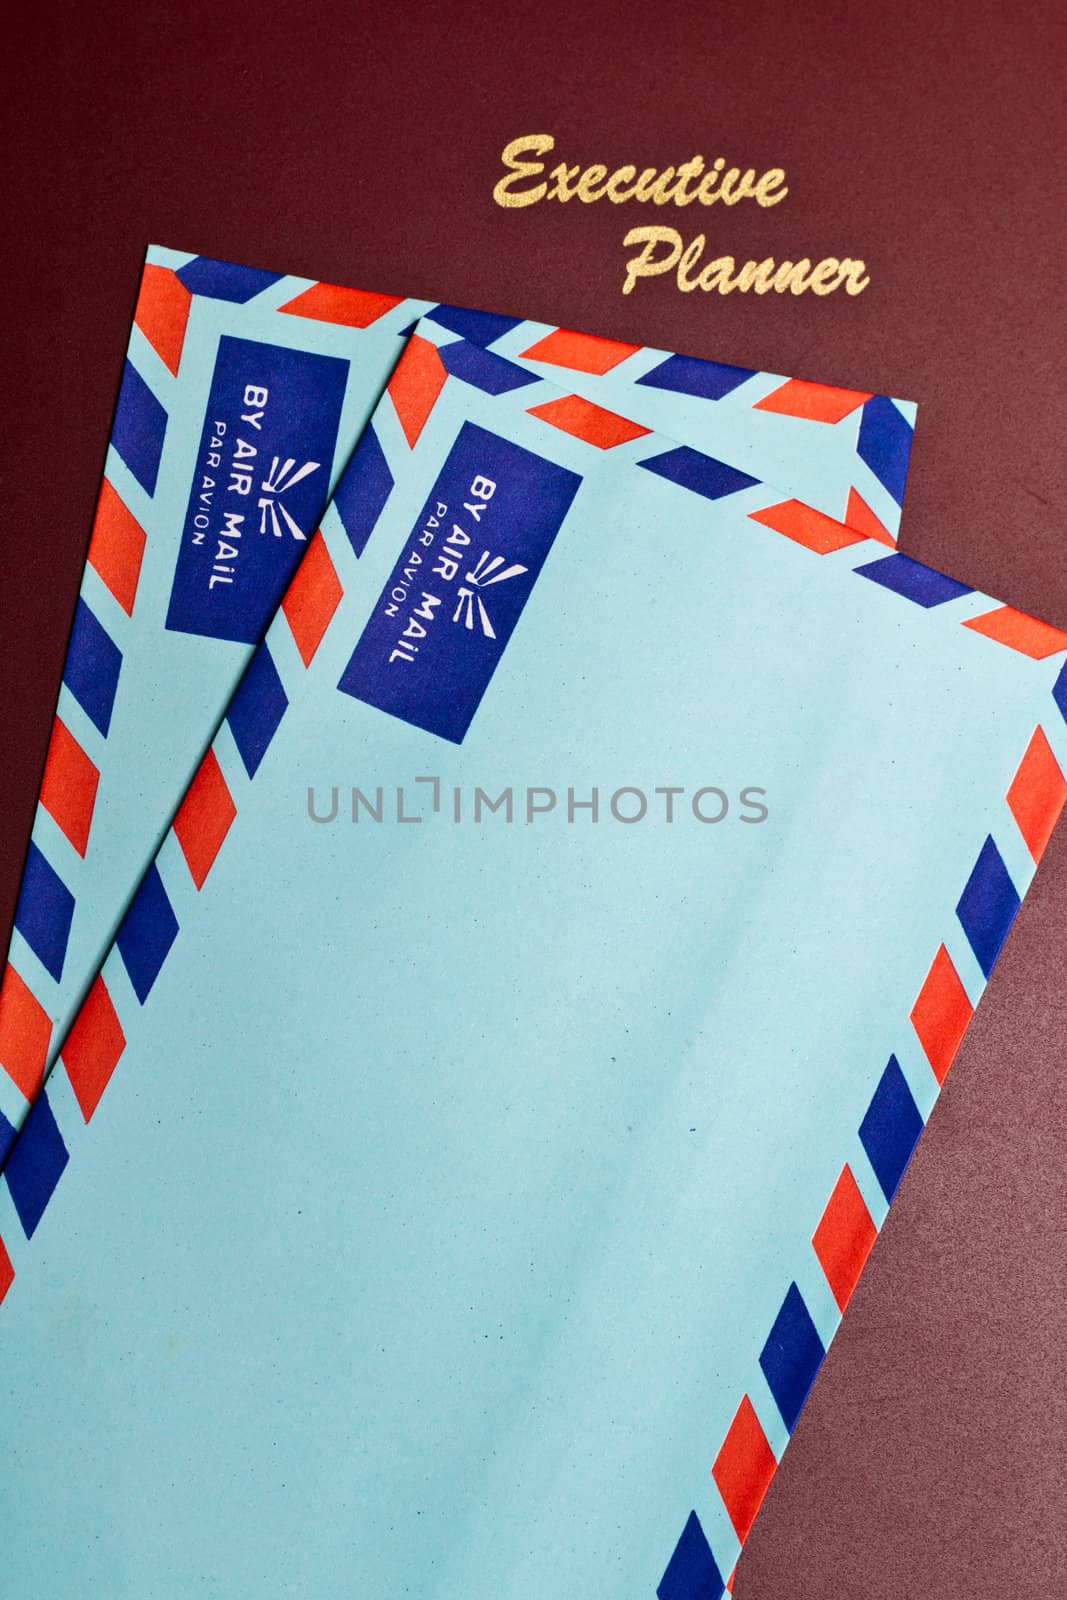 a dark red executive planner with two blue color envelopes in portrait orientation